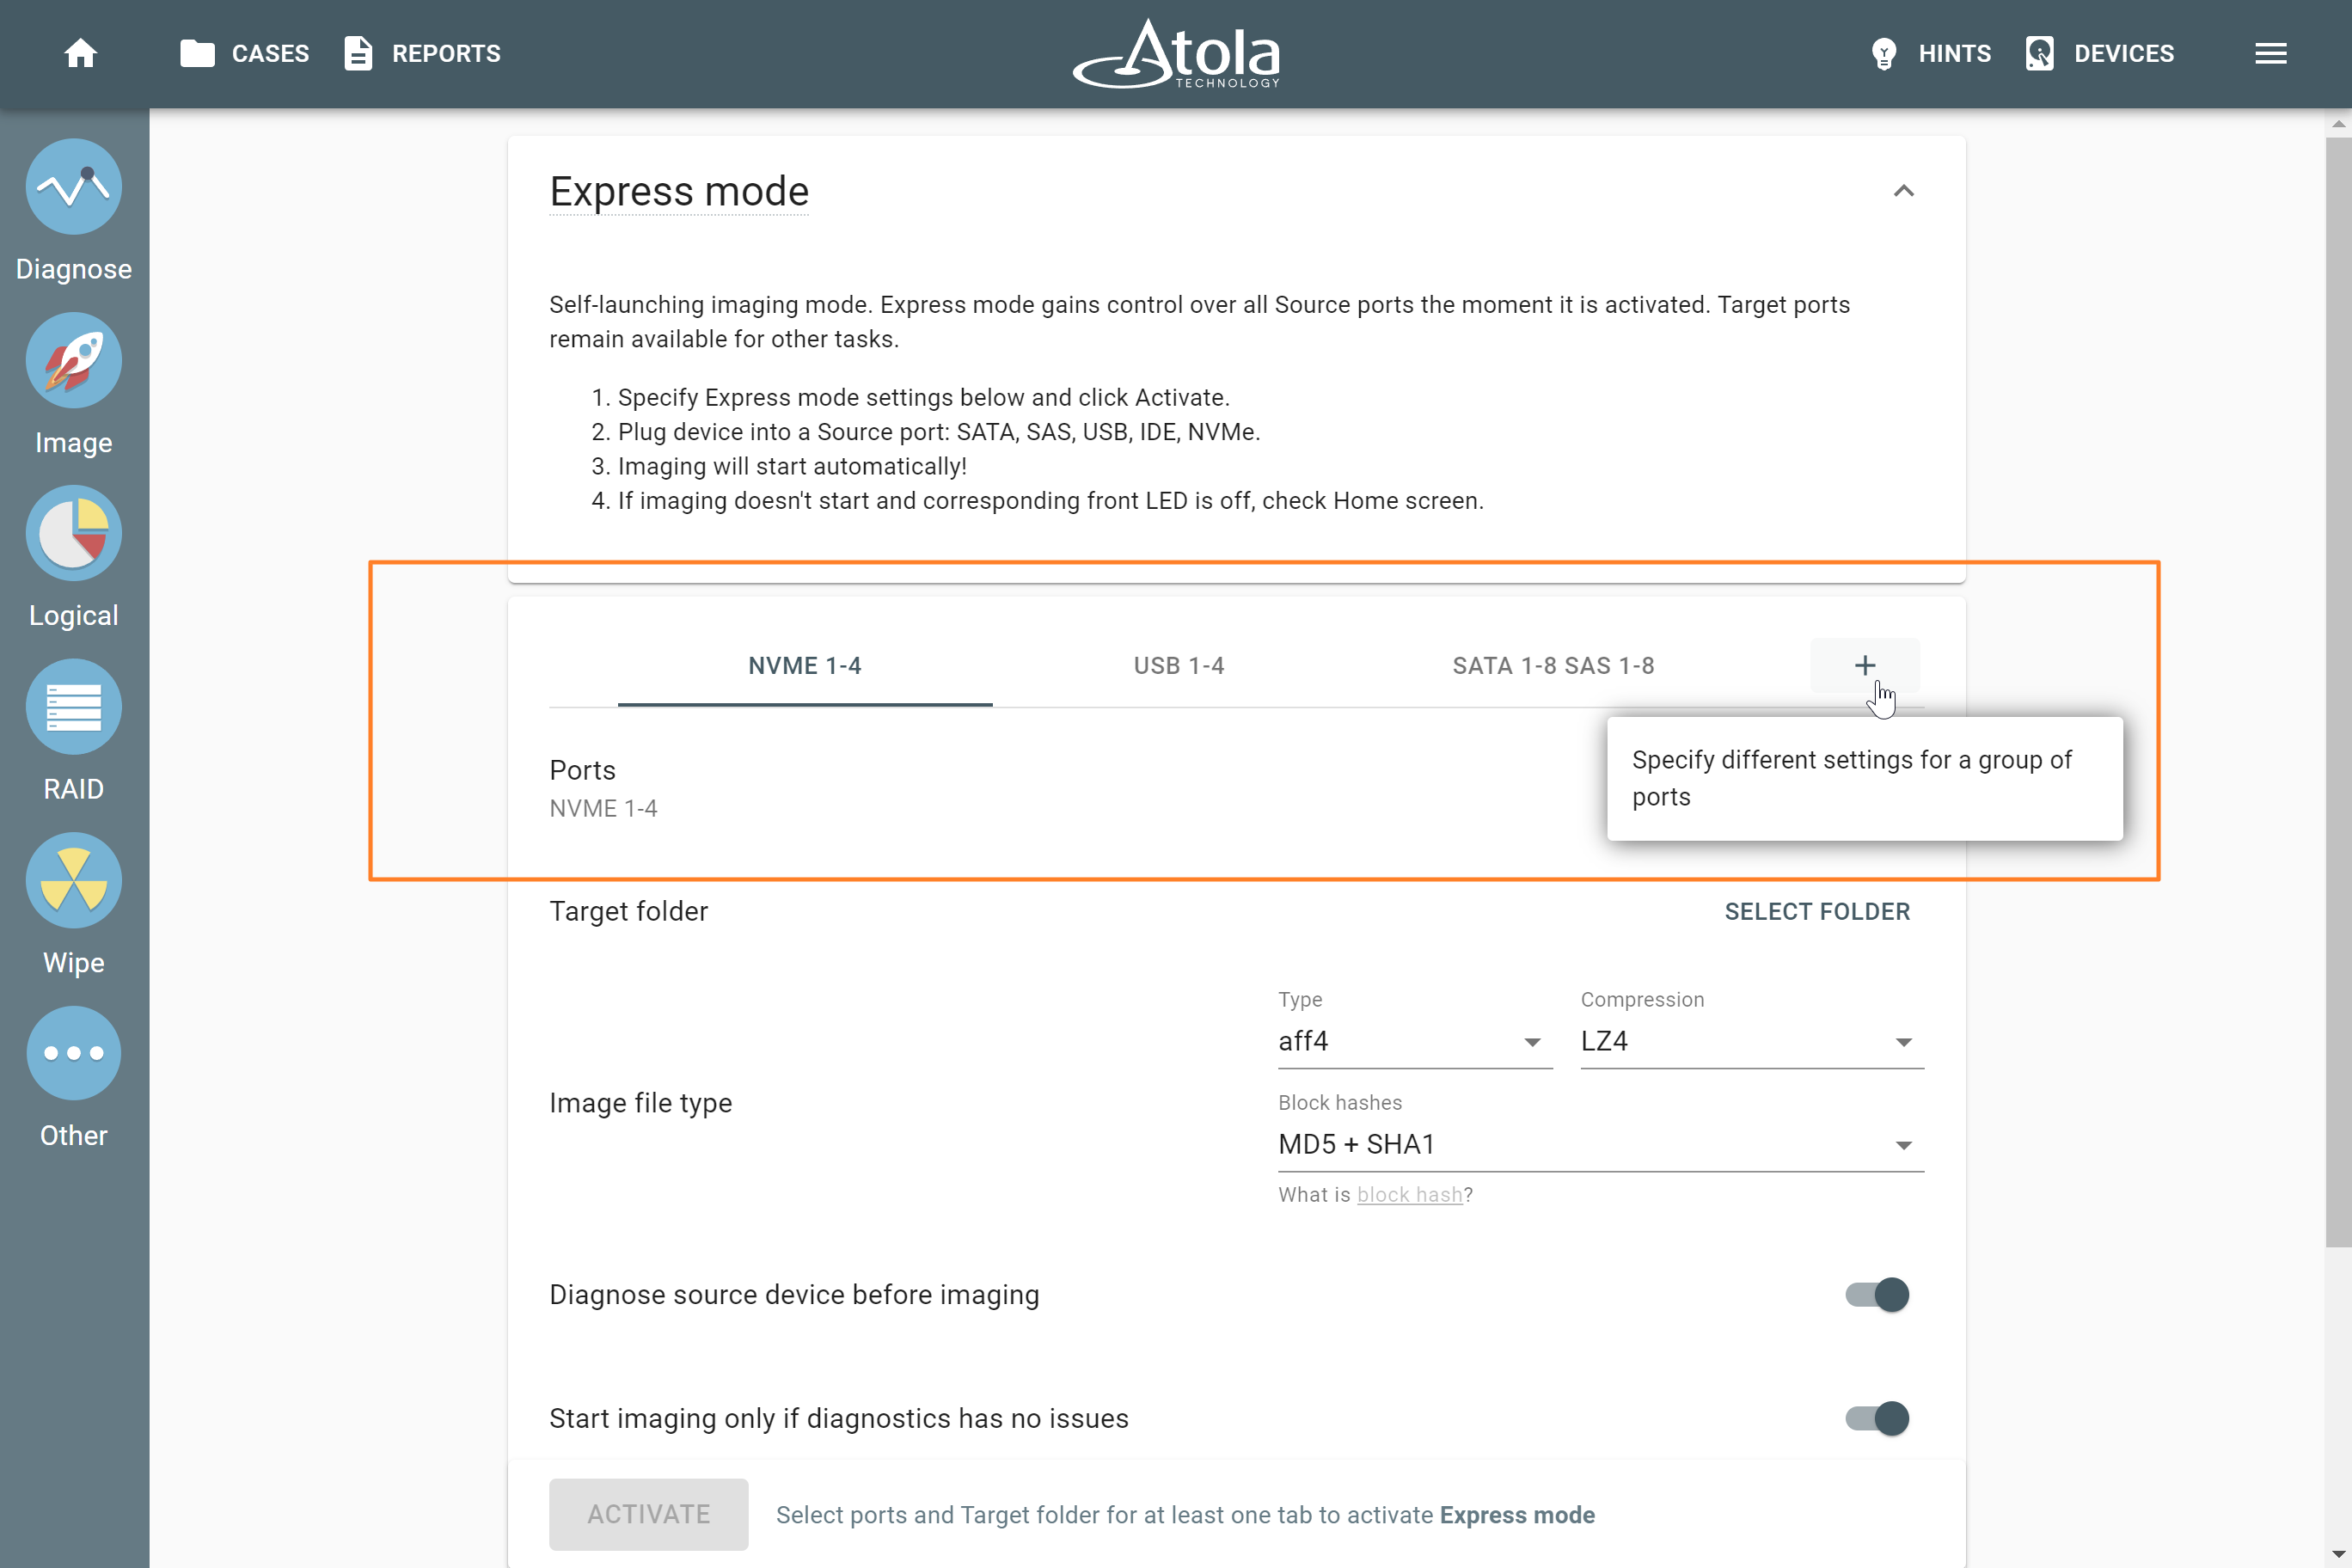 Adding port groups with different settings for Express mode in Atola TaskForce.